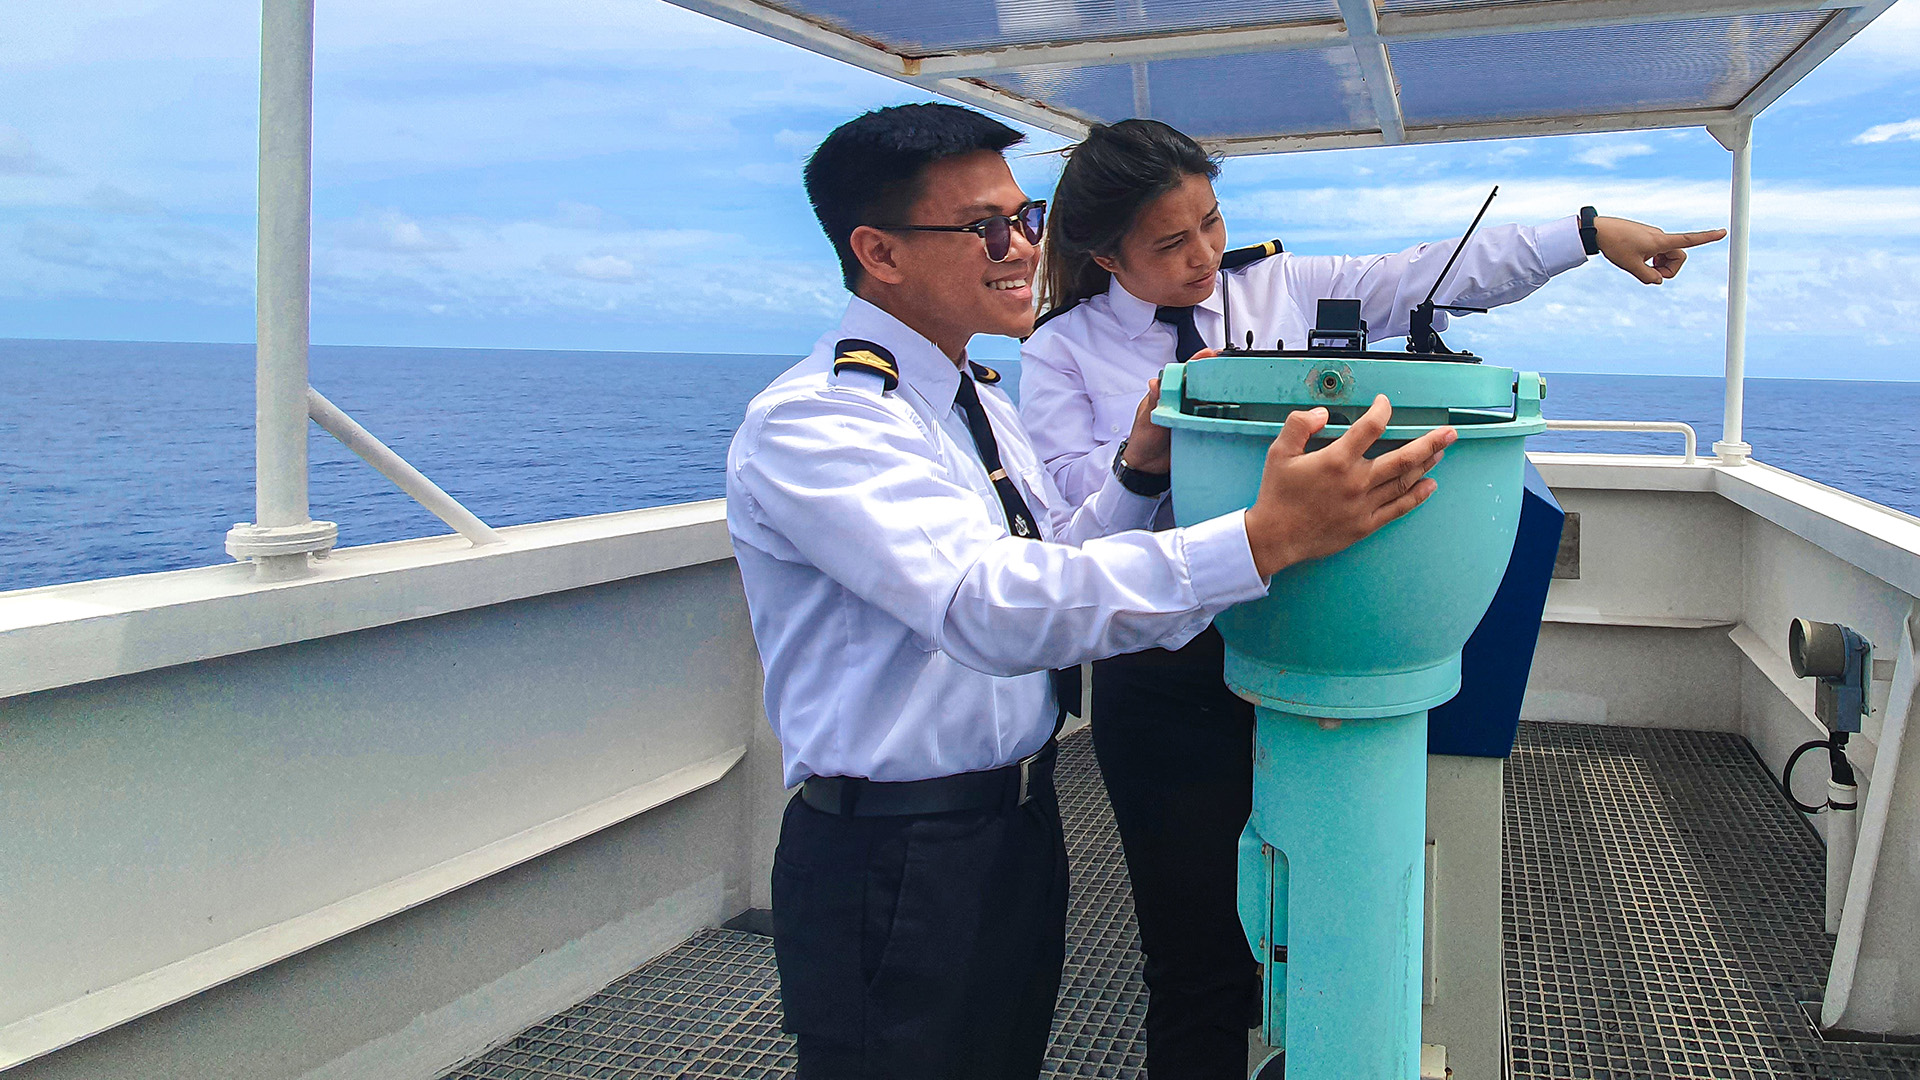 A male and female employee in uniform onboard a ship.